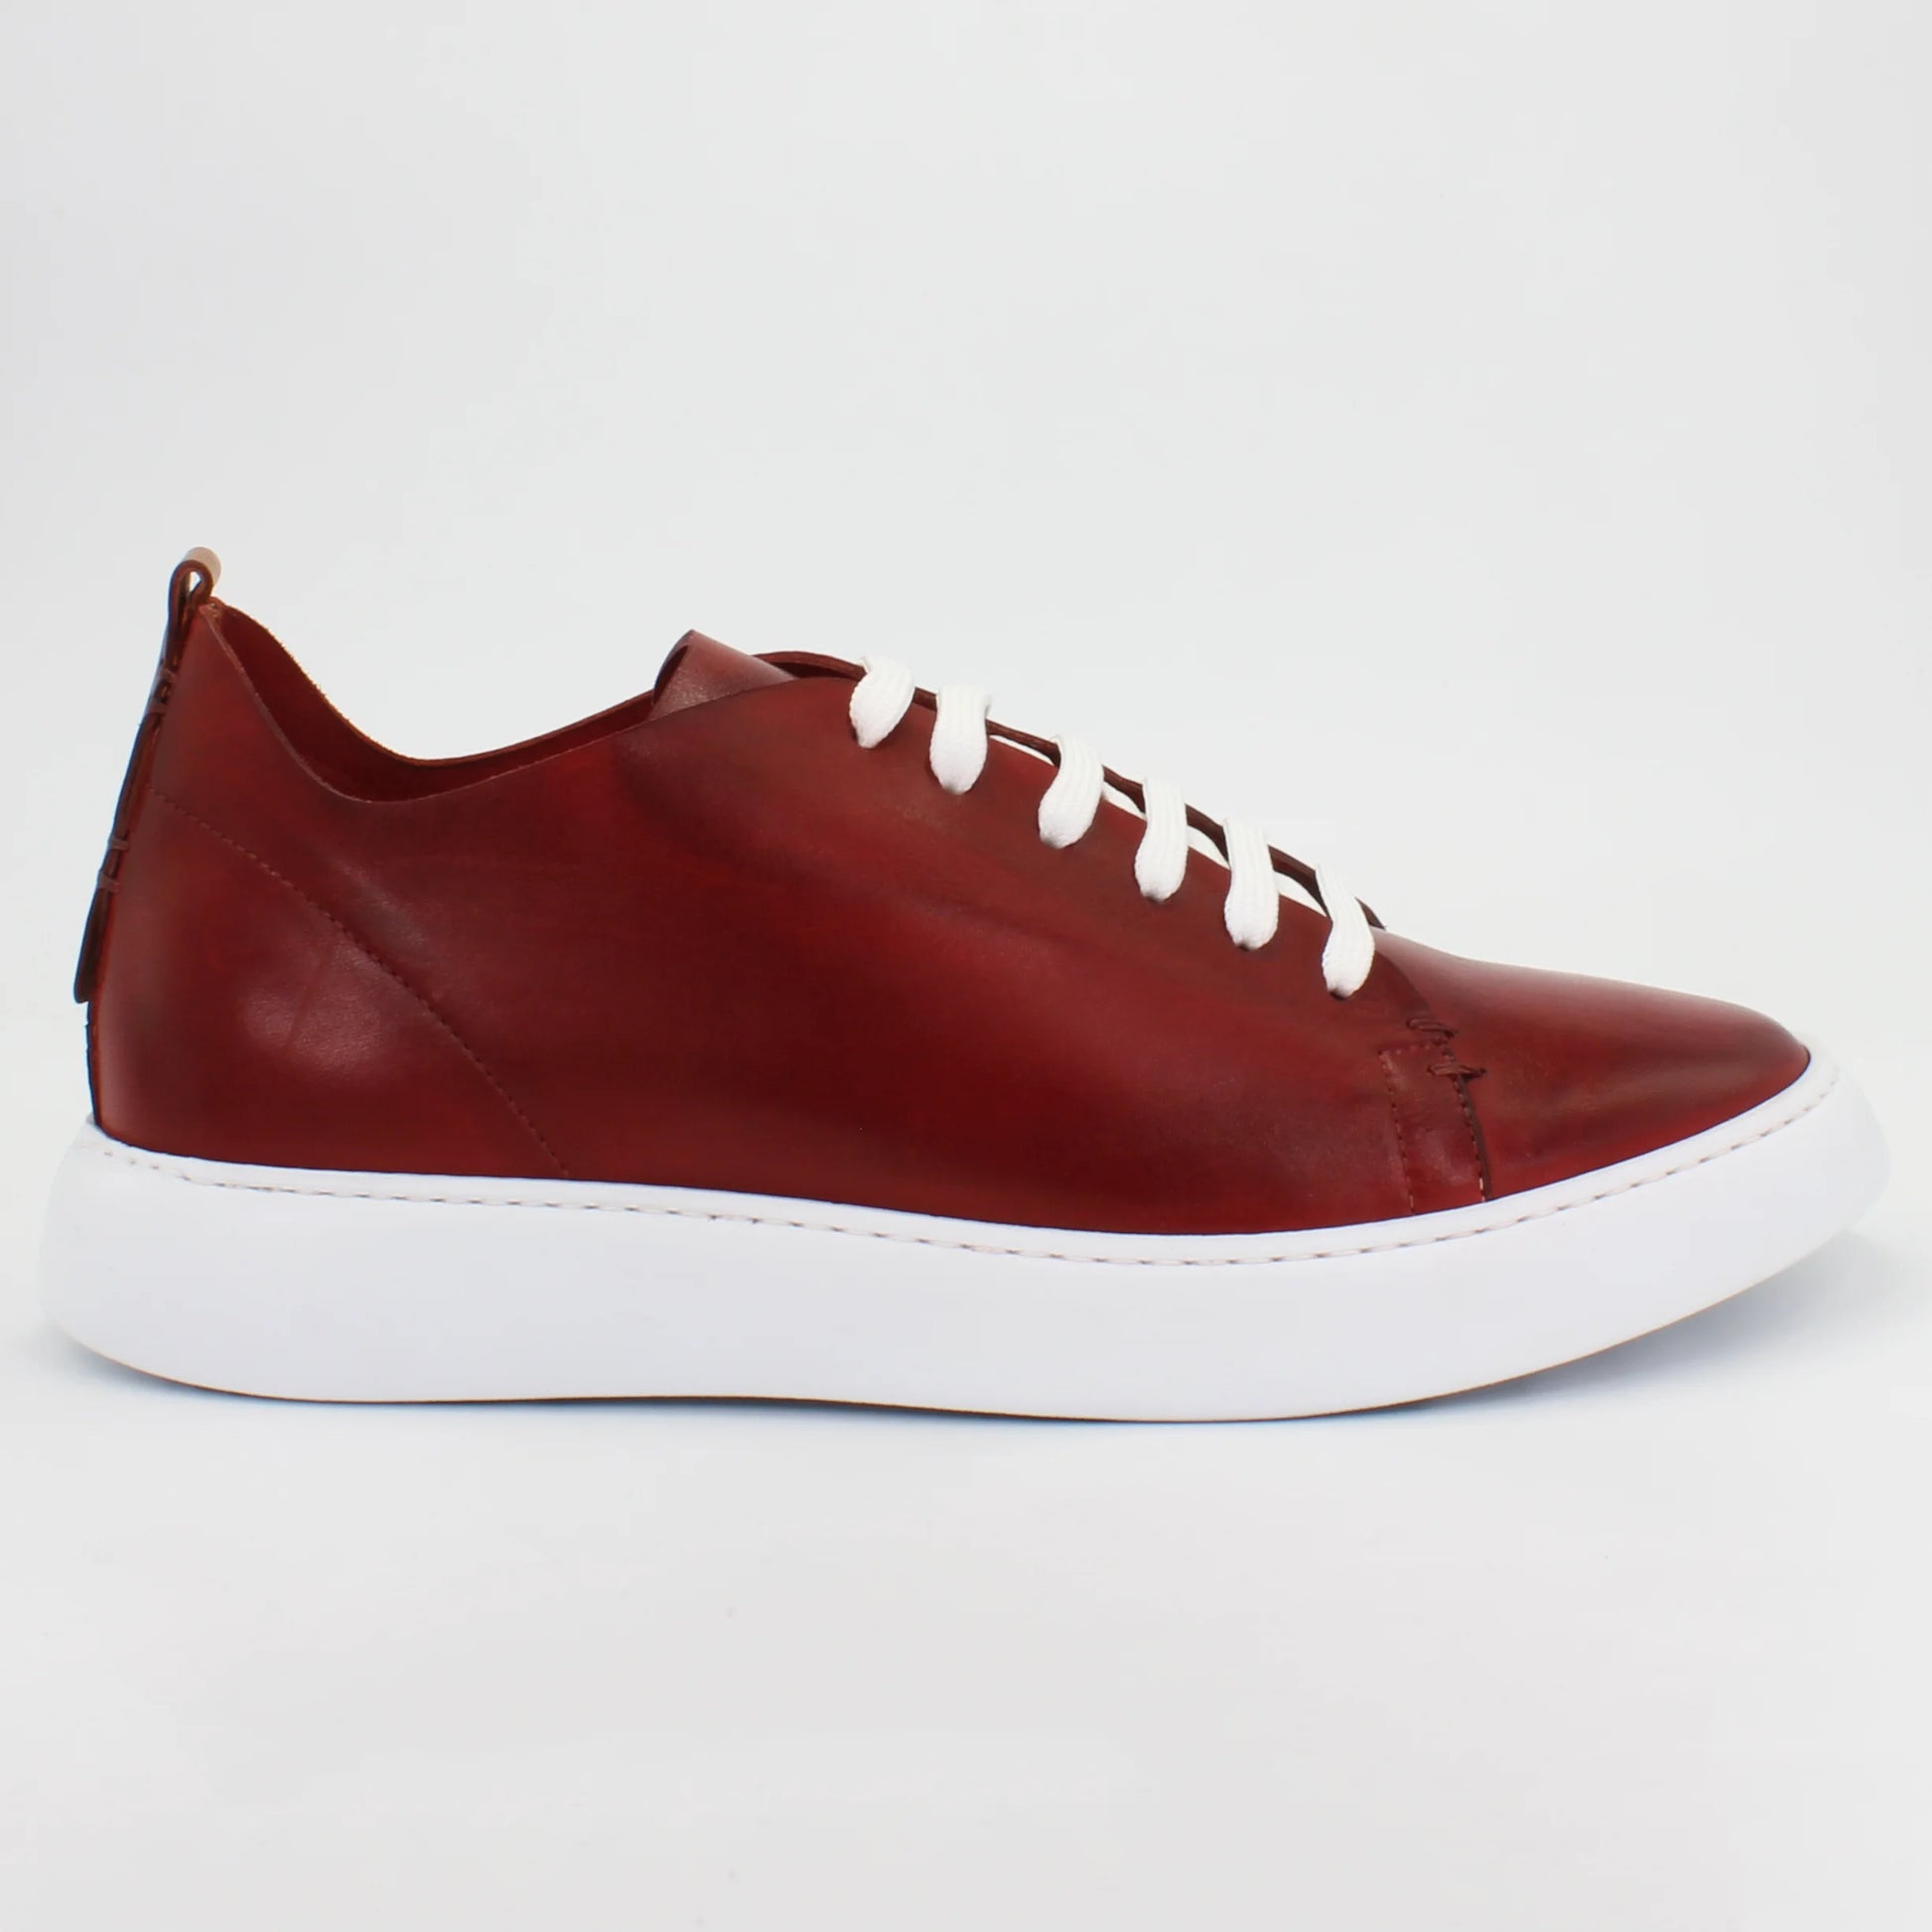 Shop Handmade Italian Leather Sneaker in red (BRU11354) or browse our range of hand-made Italian shoes for men in leather or suede in-store at Aliverti Cape Town, or shop online. We deliver in South Africa & offer multiple payment plans as well as accept multiple safe & secure payment methods.